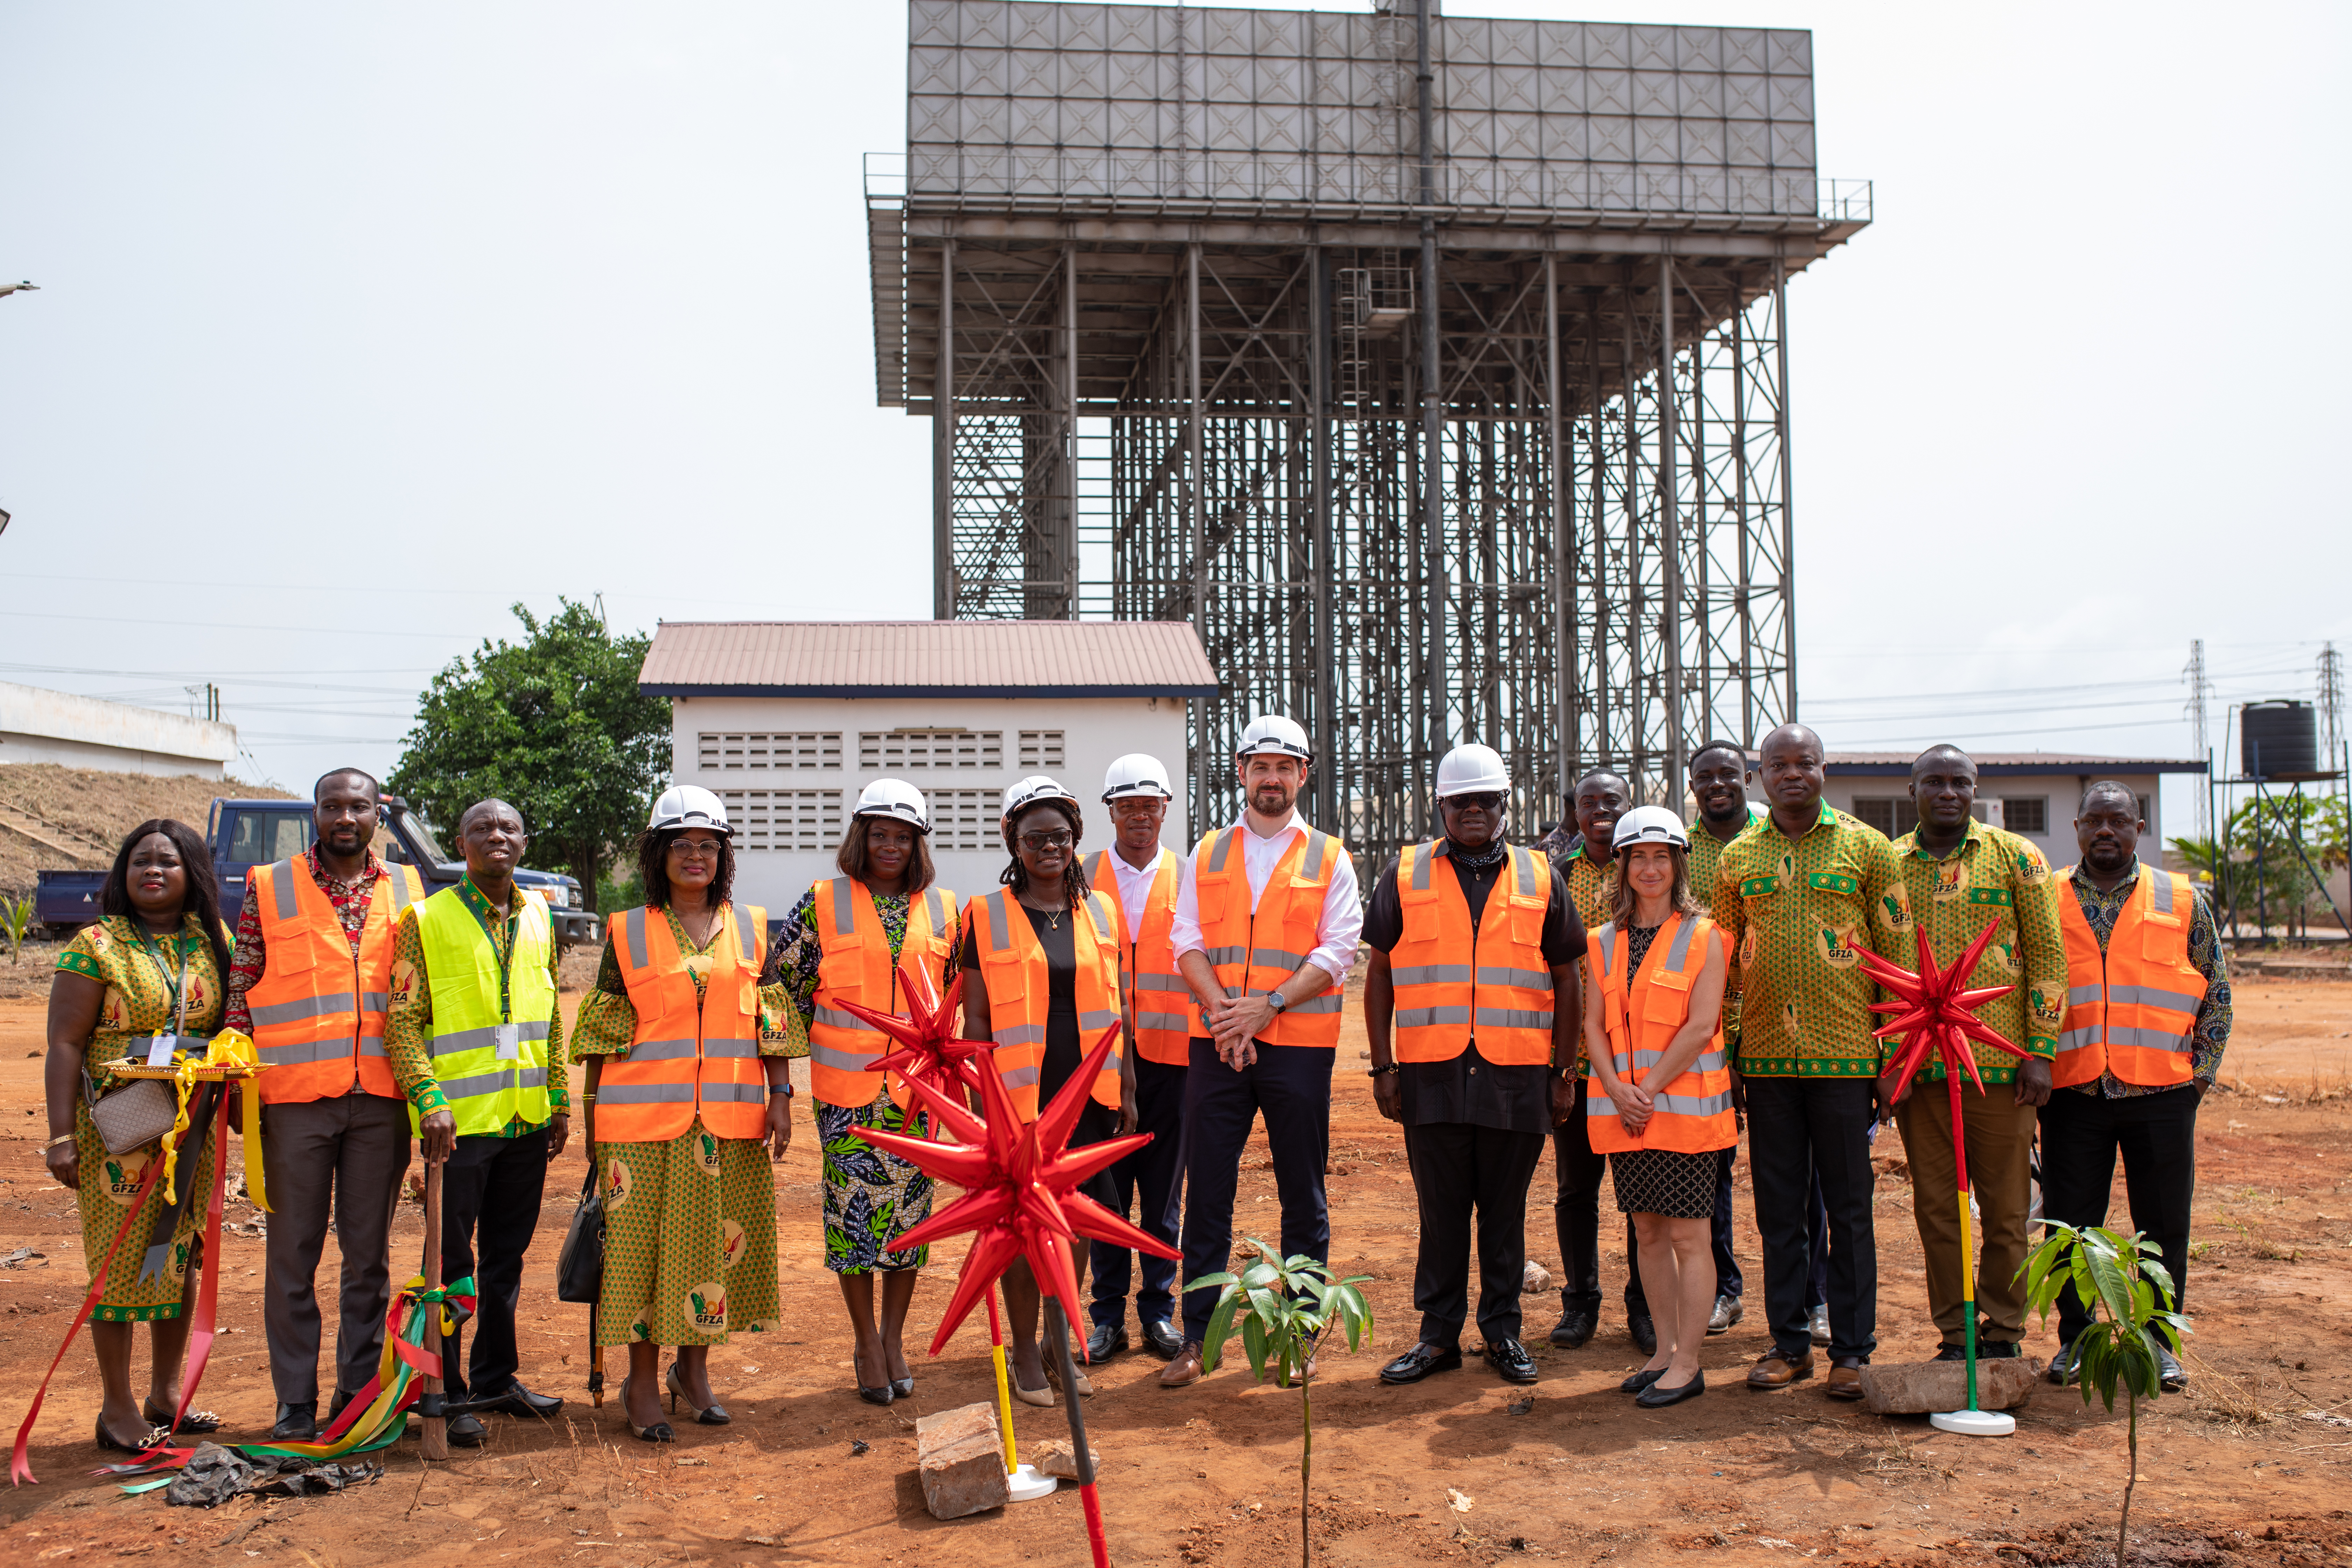 Ground stone laying ceremony for a new water tank at the Tema Export Processing Zone.